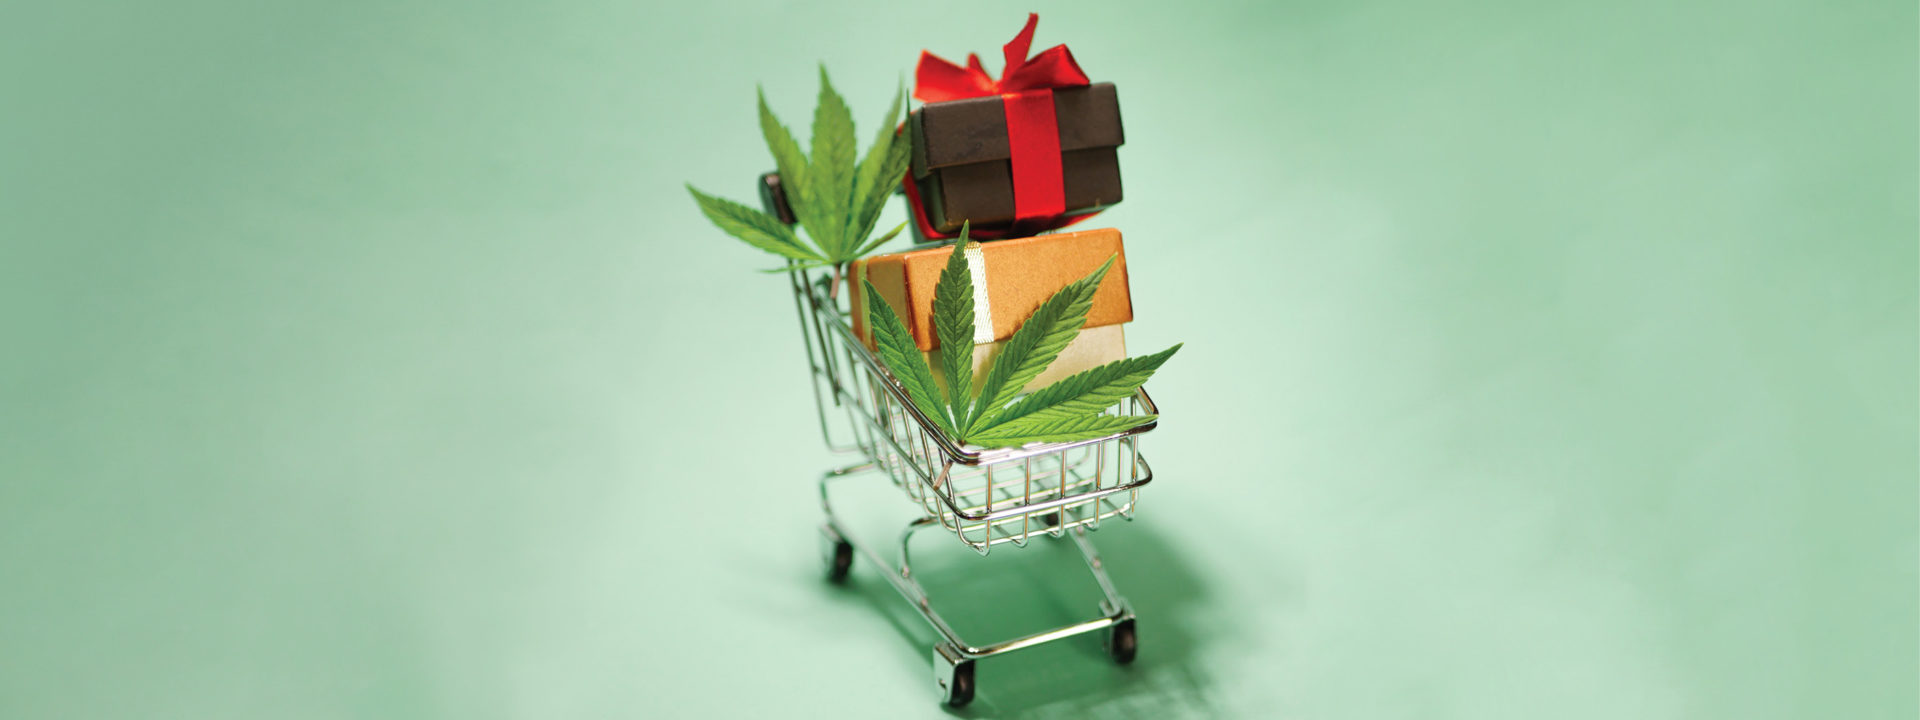 Silver shopping cart on light green background with two cannabis leaves in the cart and two small presents wrapped in a bow